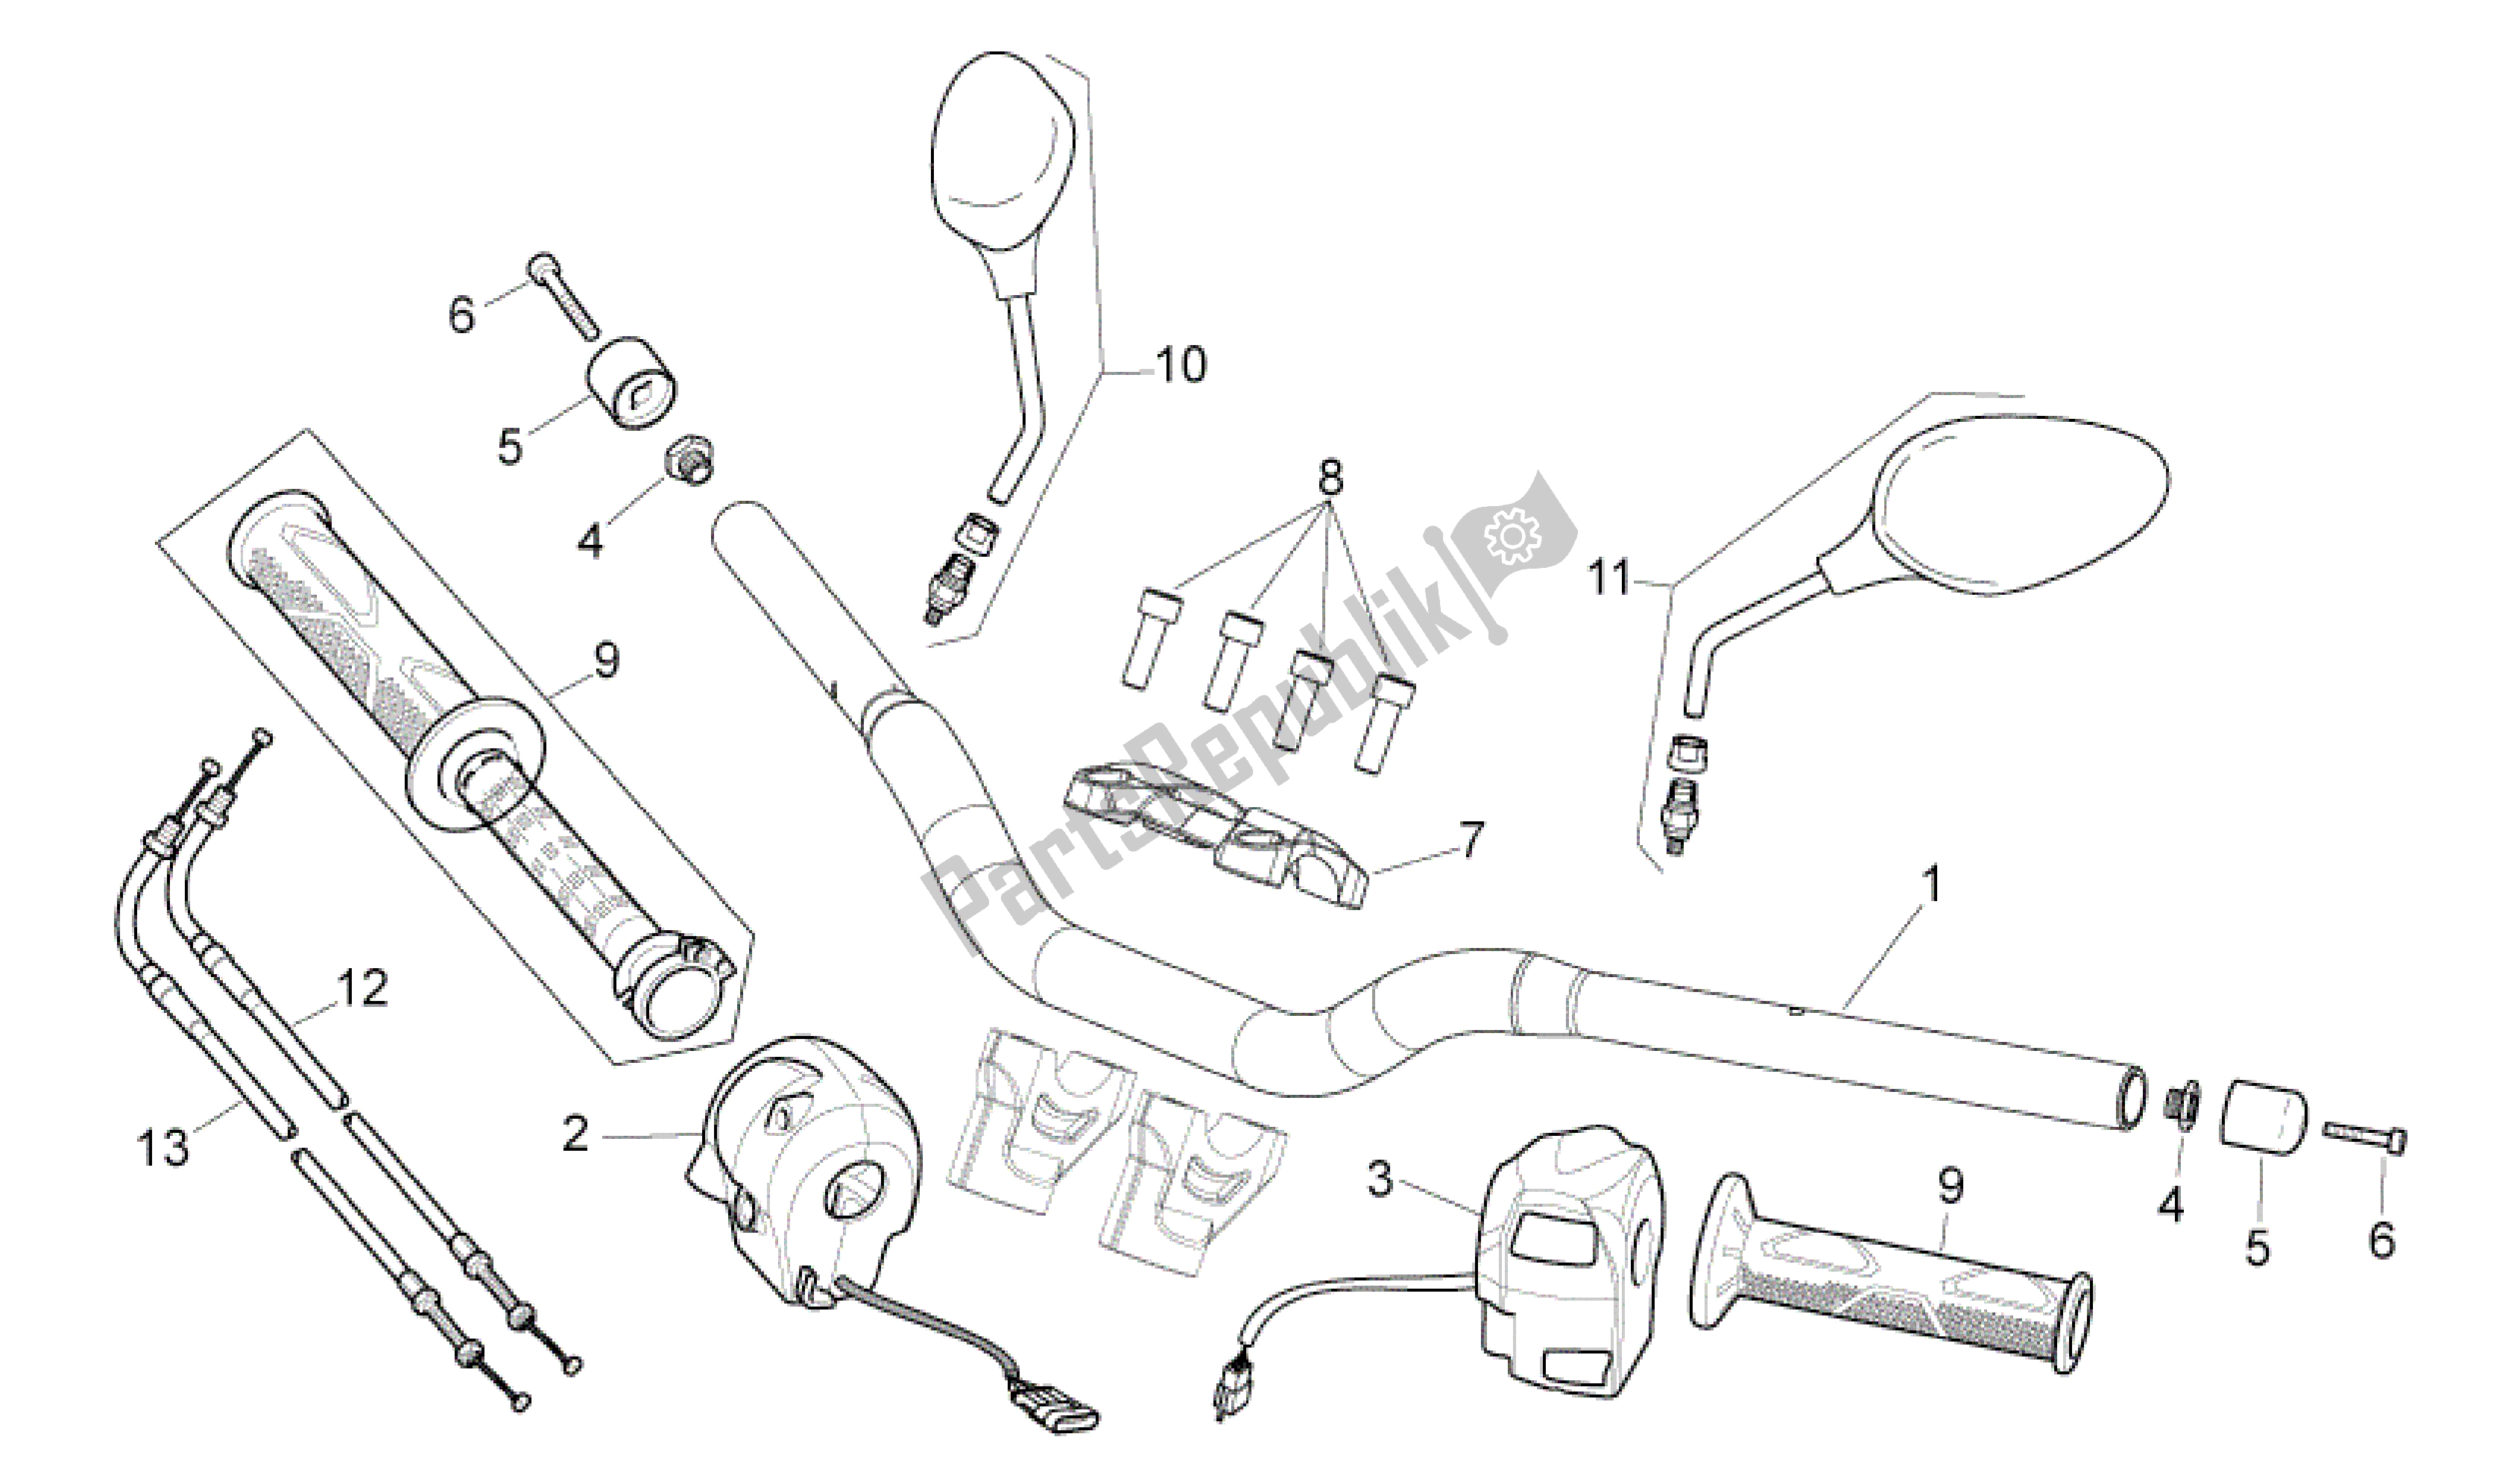 All parts for the Handlebar - Controls of the Aprilia Shiver 750 2007 - 2009